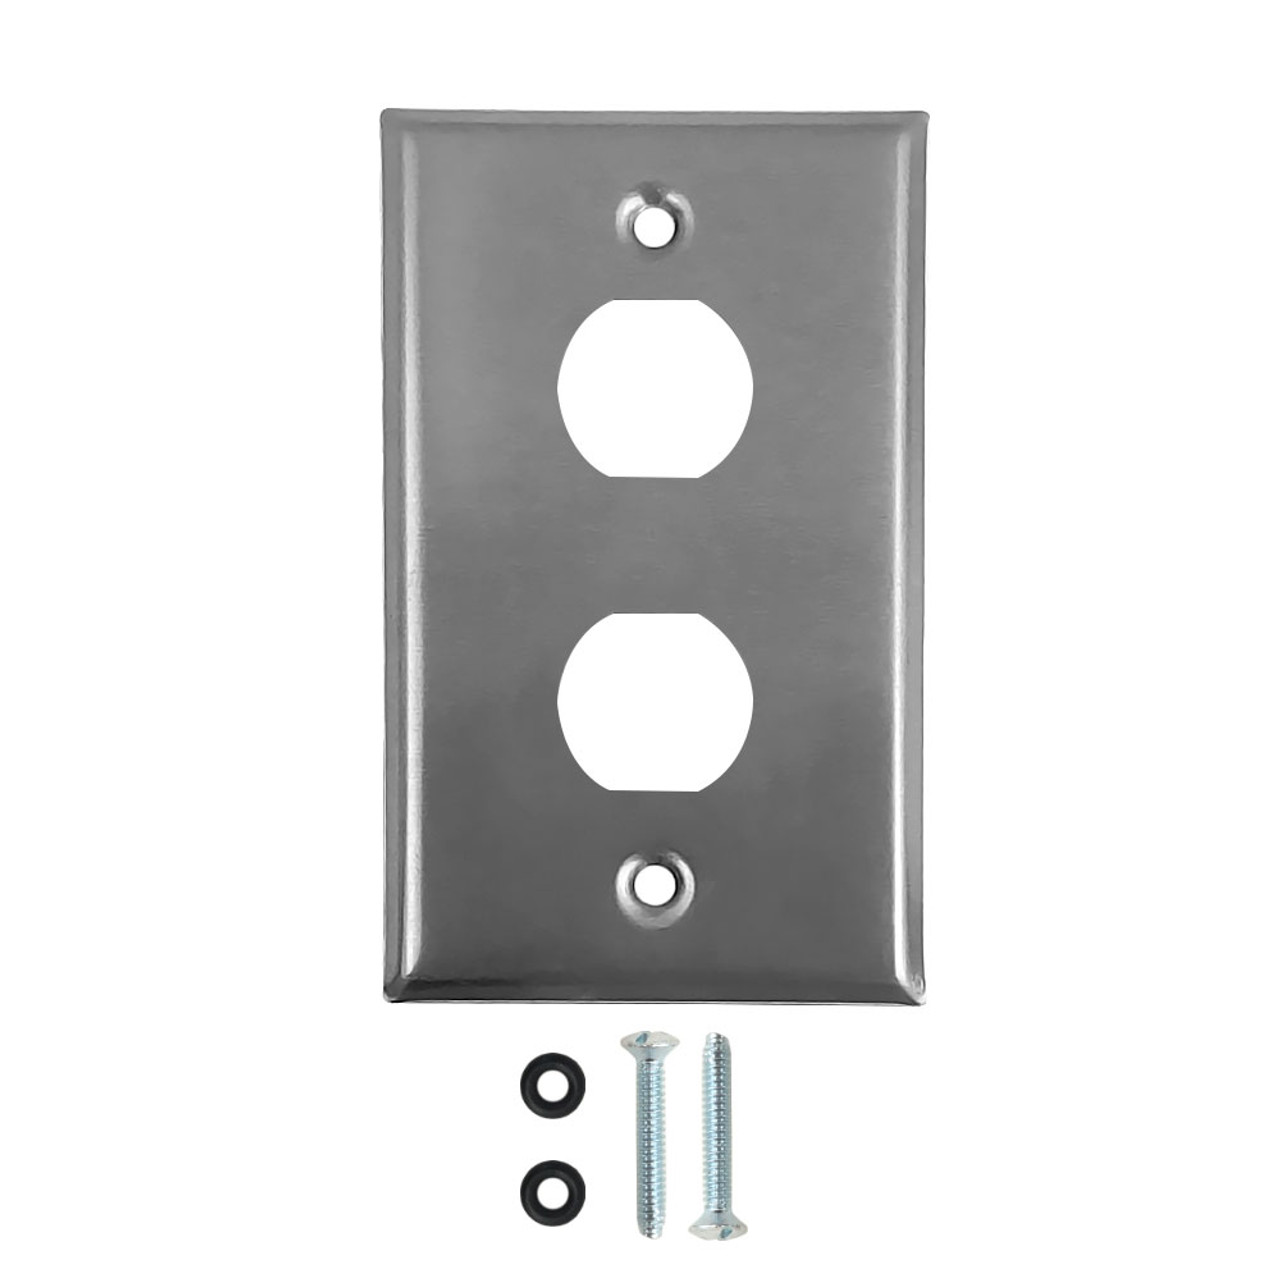 Single Gang Wall Plate 2x Ethernet Bulkhead Hole IP44 Rated Stainless Steel